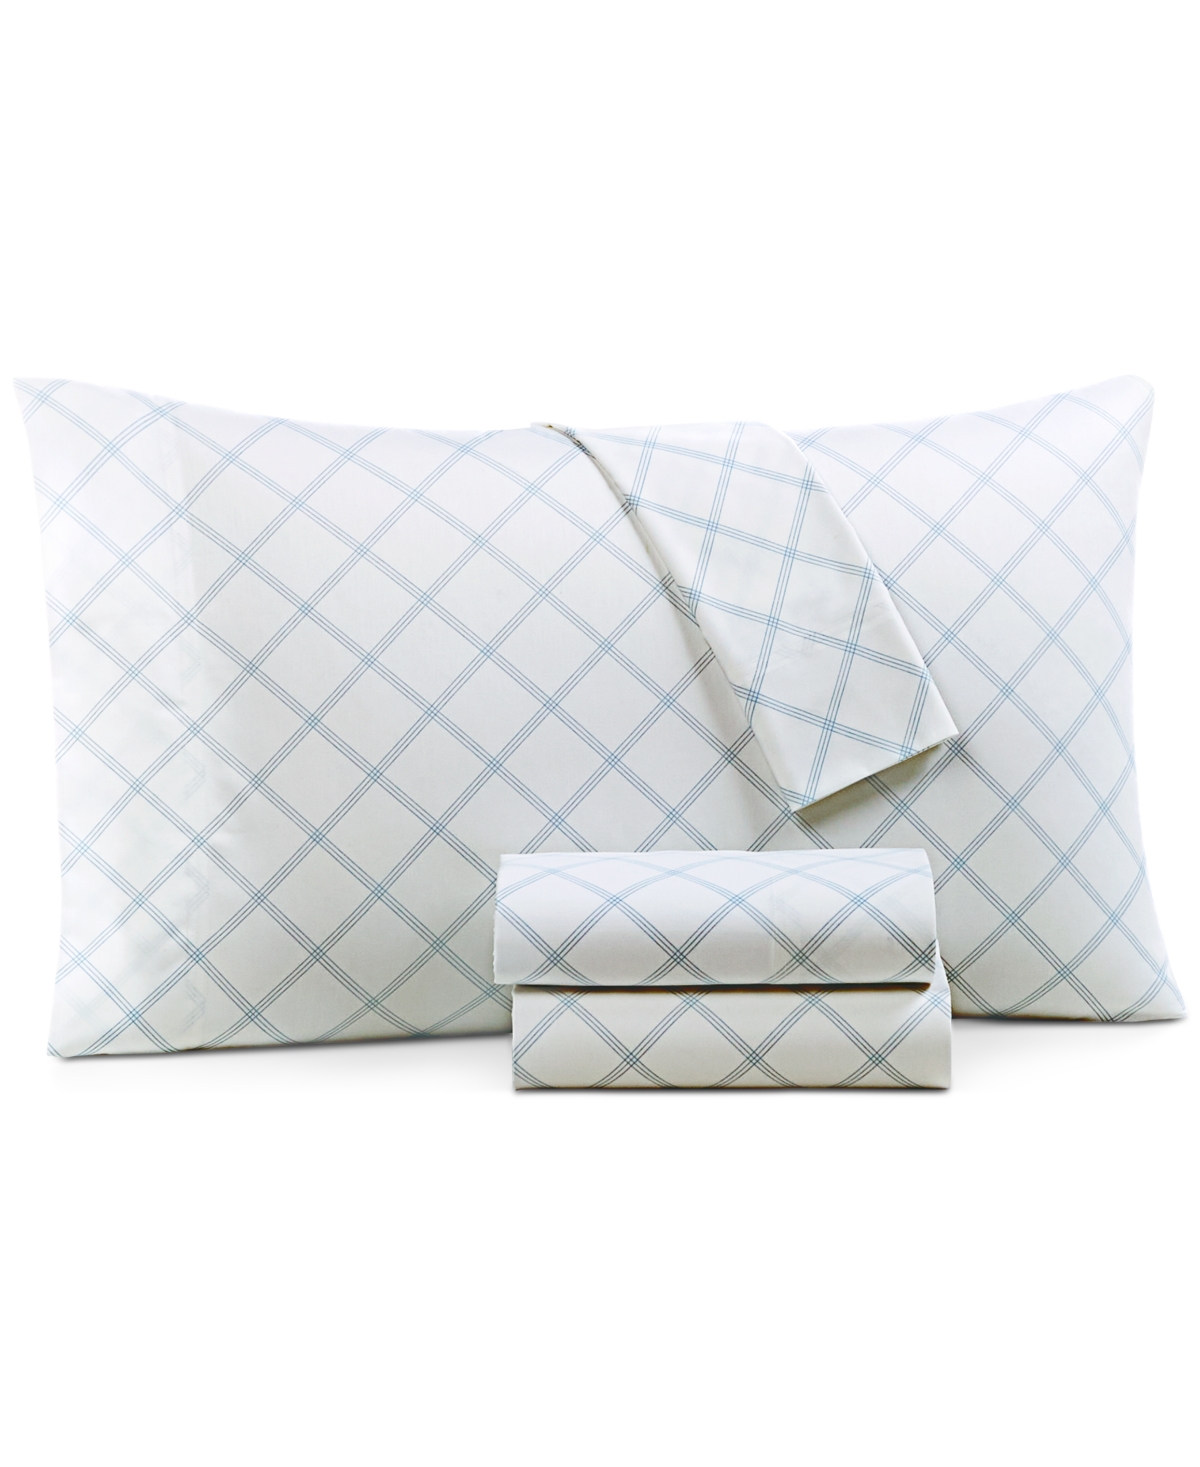 Charter Club Damask Designs 550 Thread Count Printed Cotton 4-pc. Sheet Set, Queen, Created For Macy's In Windowpane Blue